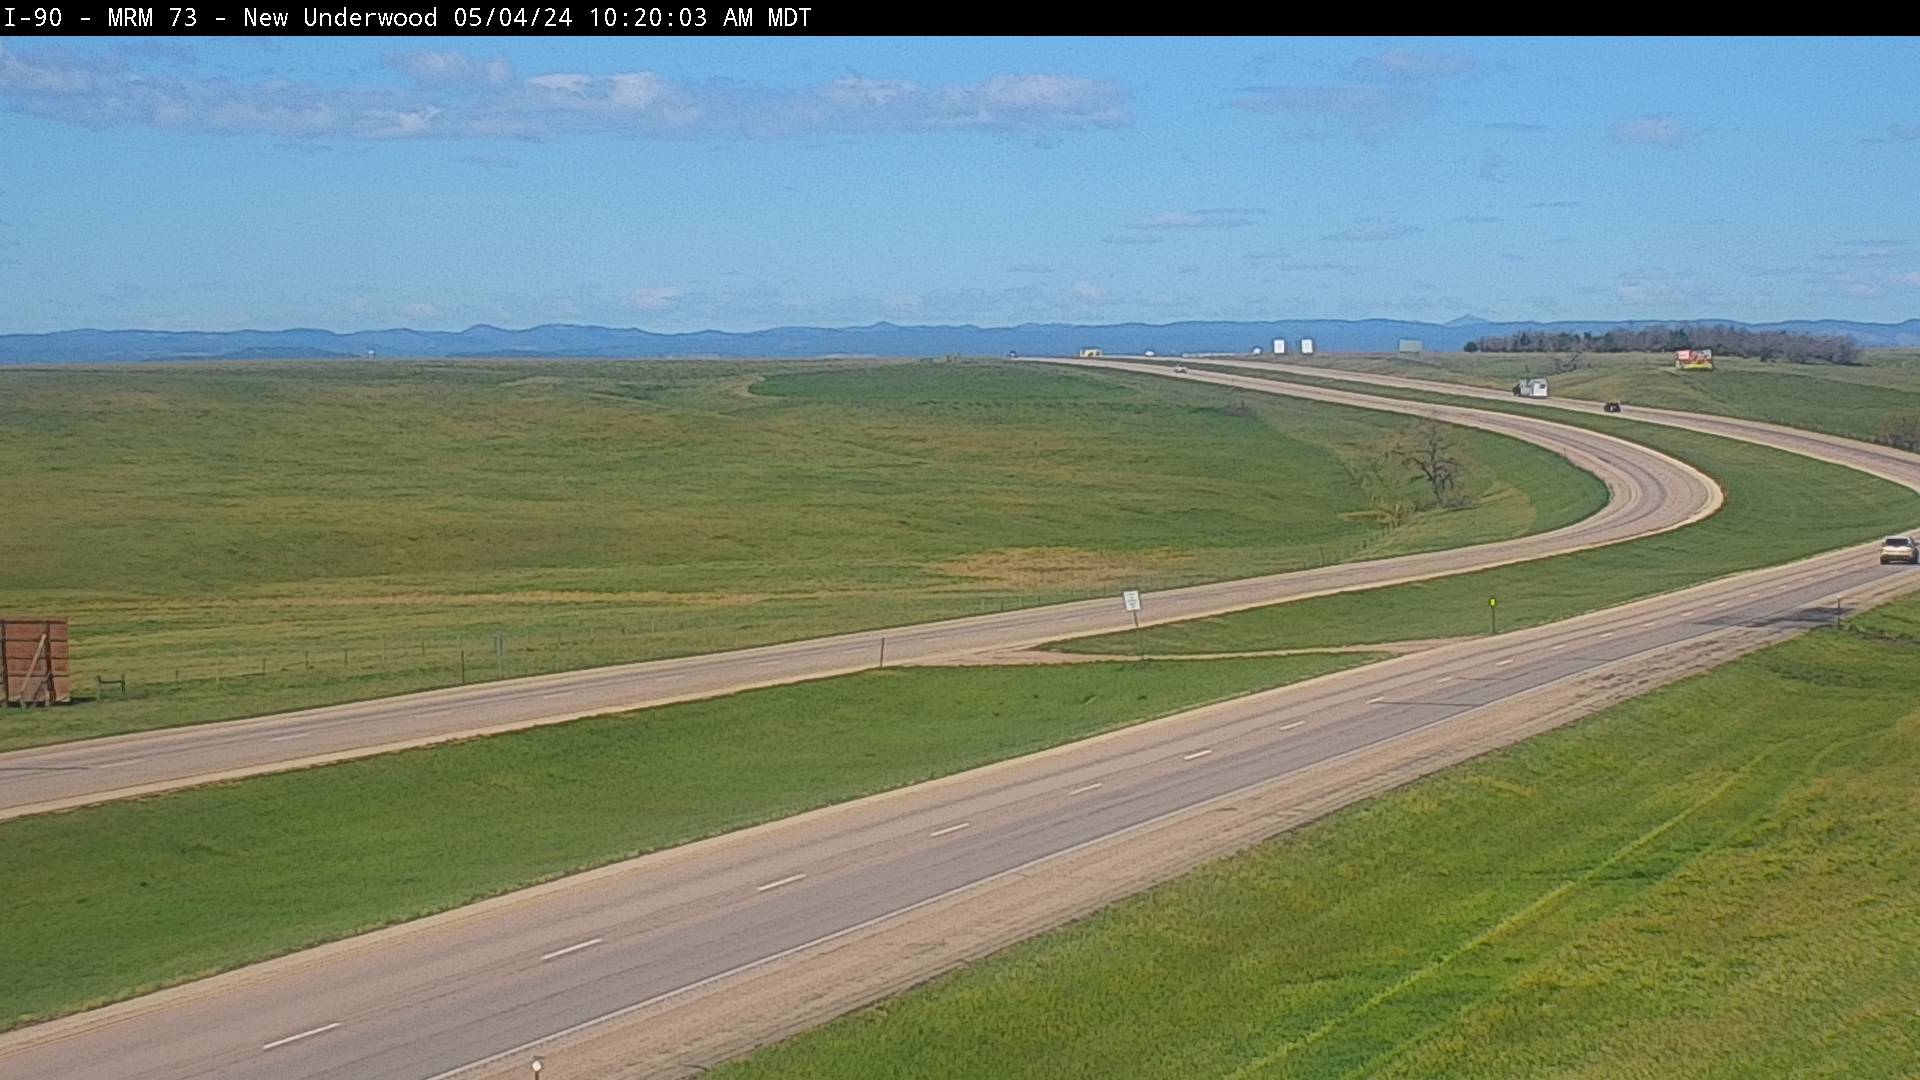 5 miles west of town along I-90 @ MP 73 - West Traffic Camera